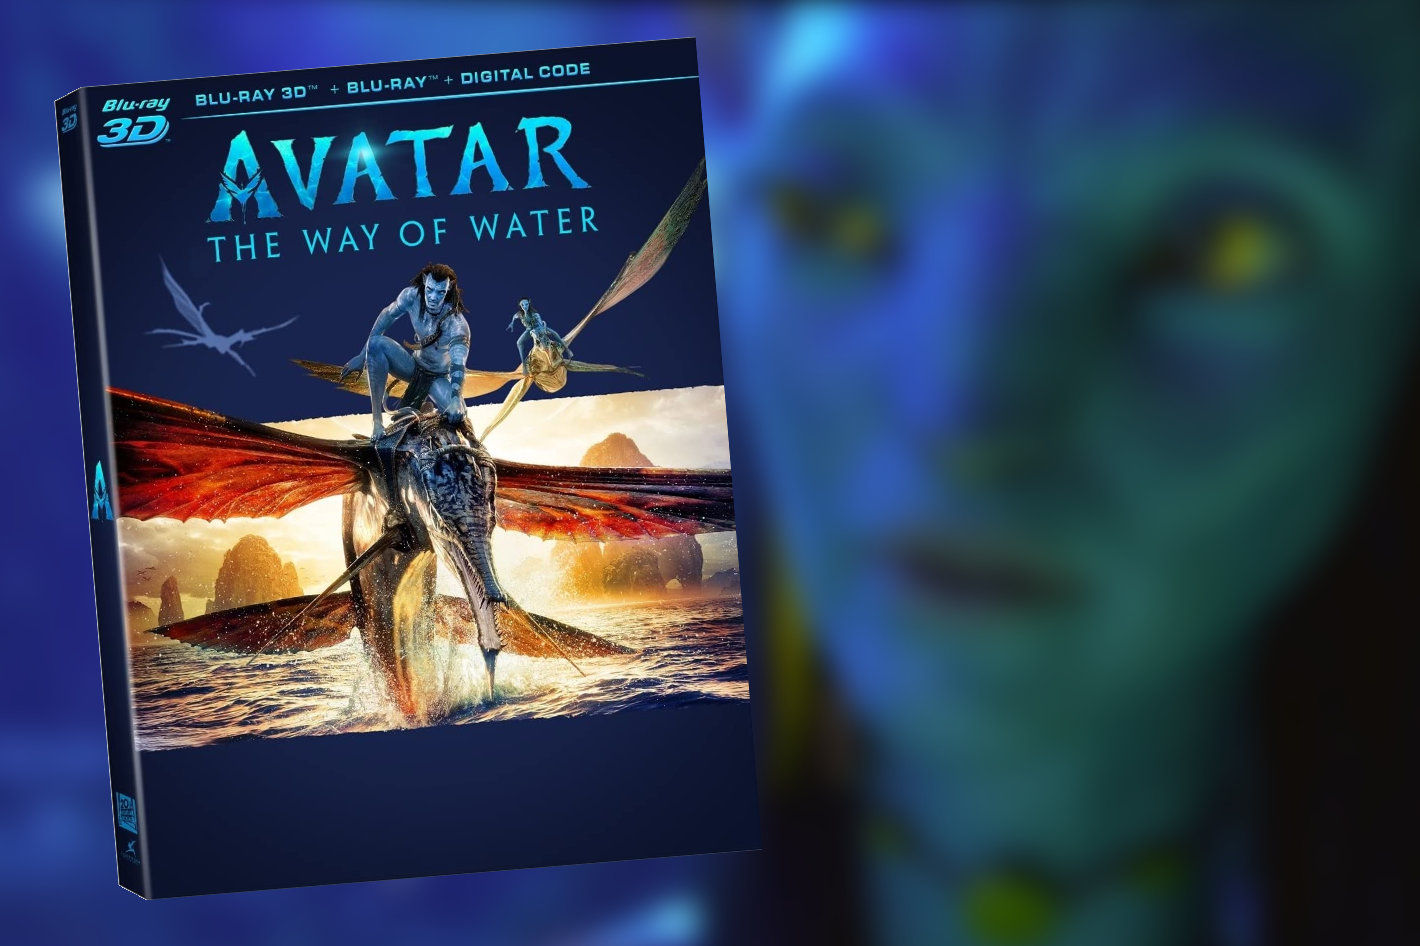 Avatar: The Way of the Water, a 3D Blu-ray to watch home in VR